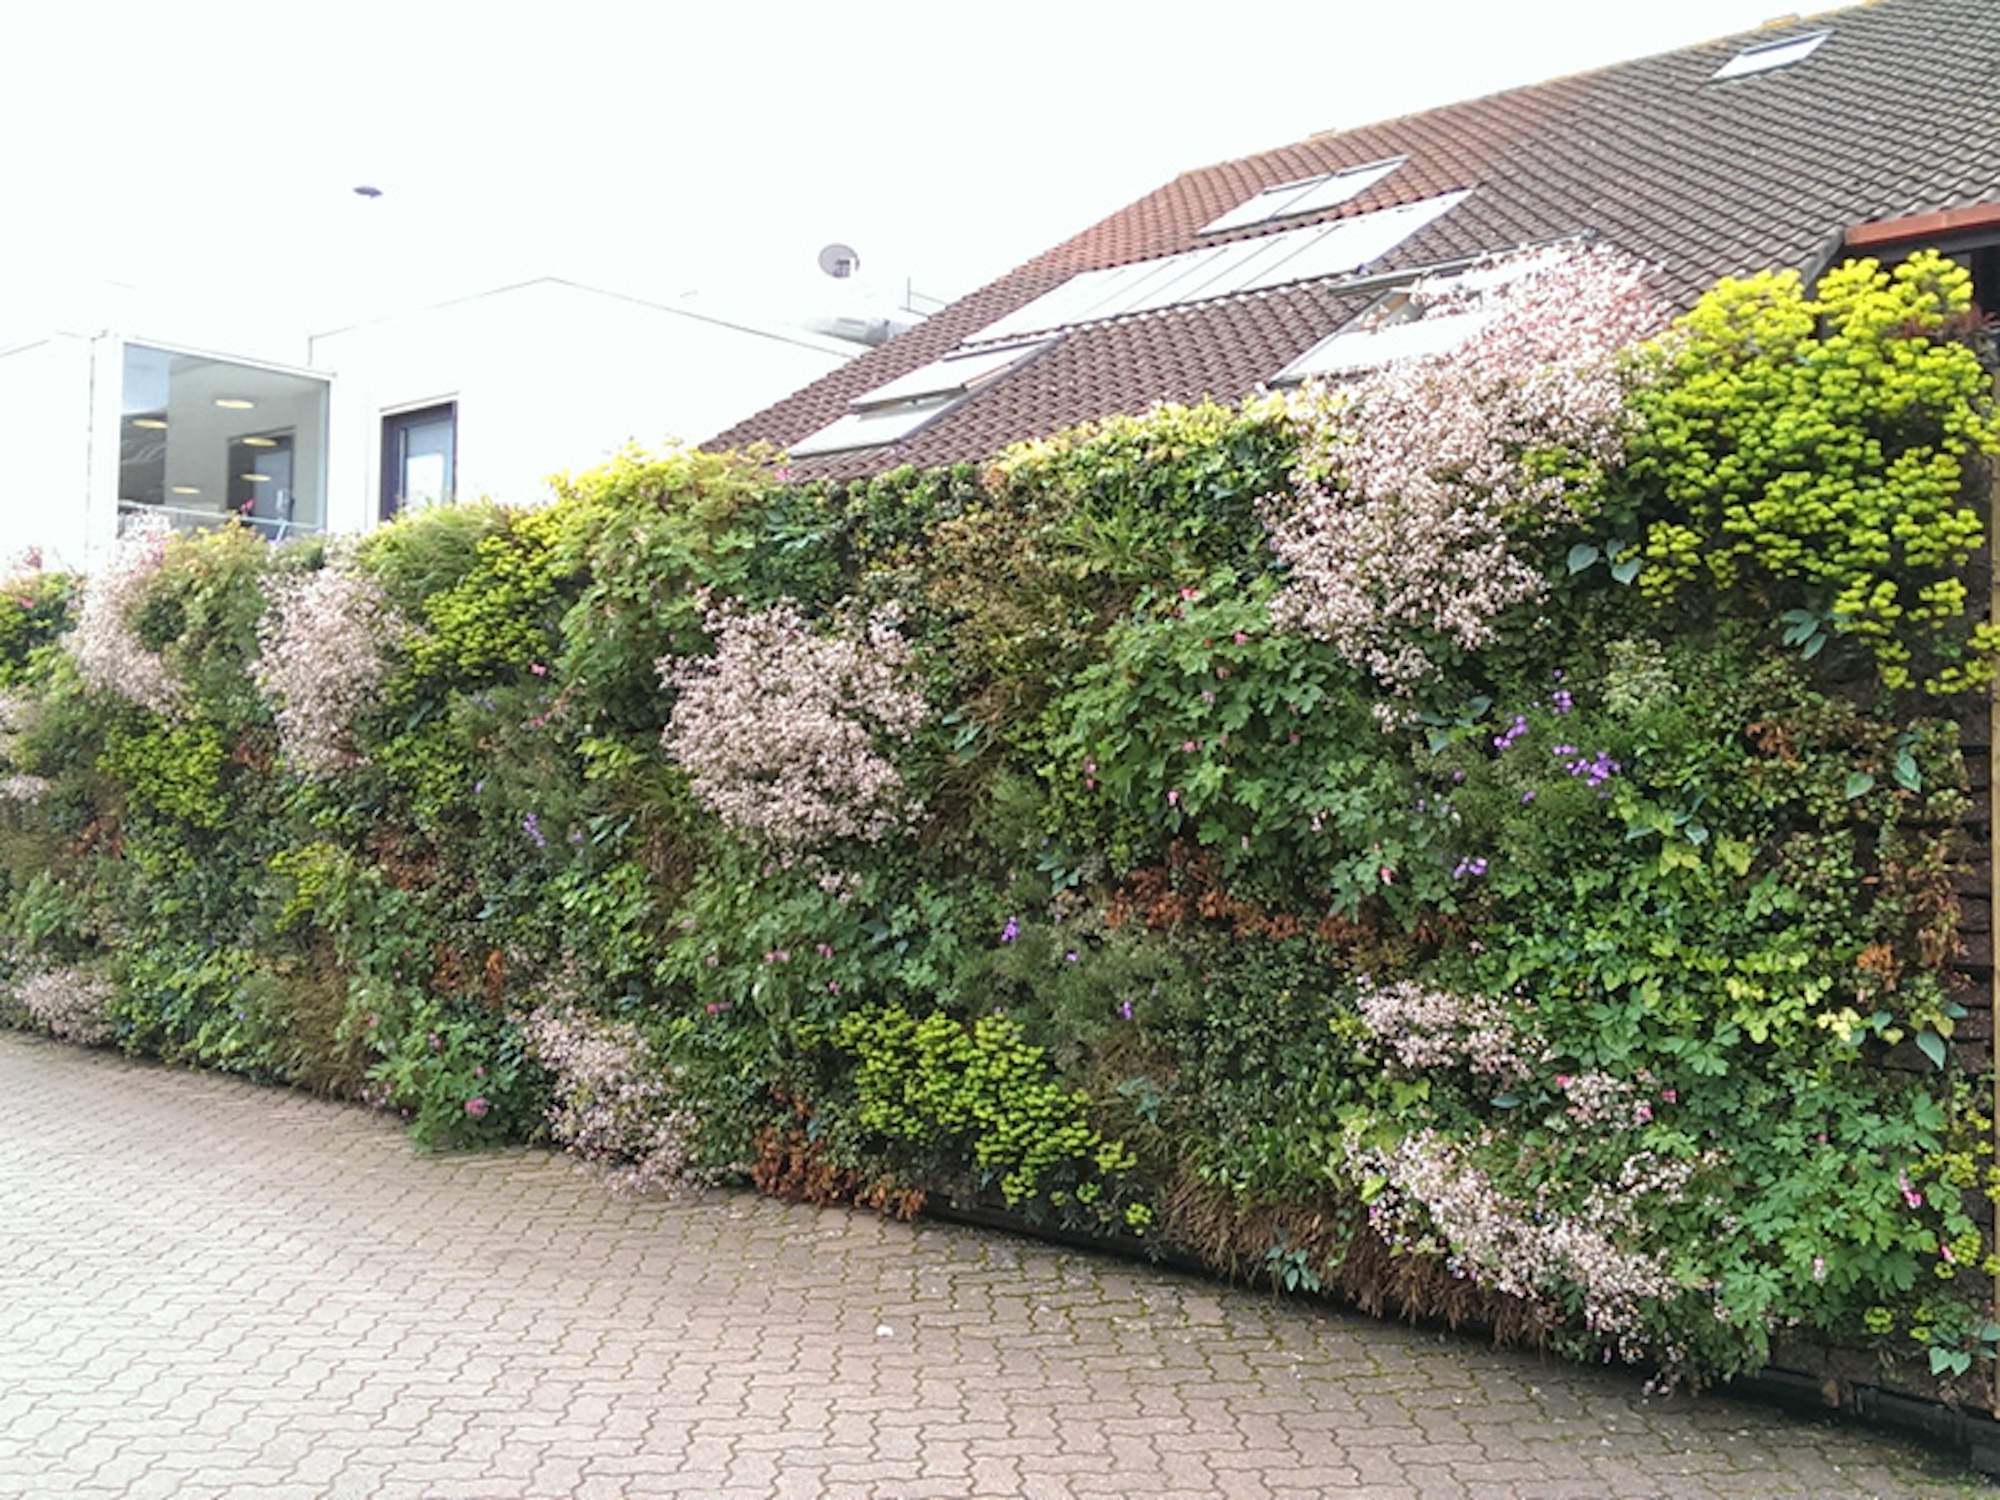 Flowering Living Wall for Air Purification